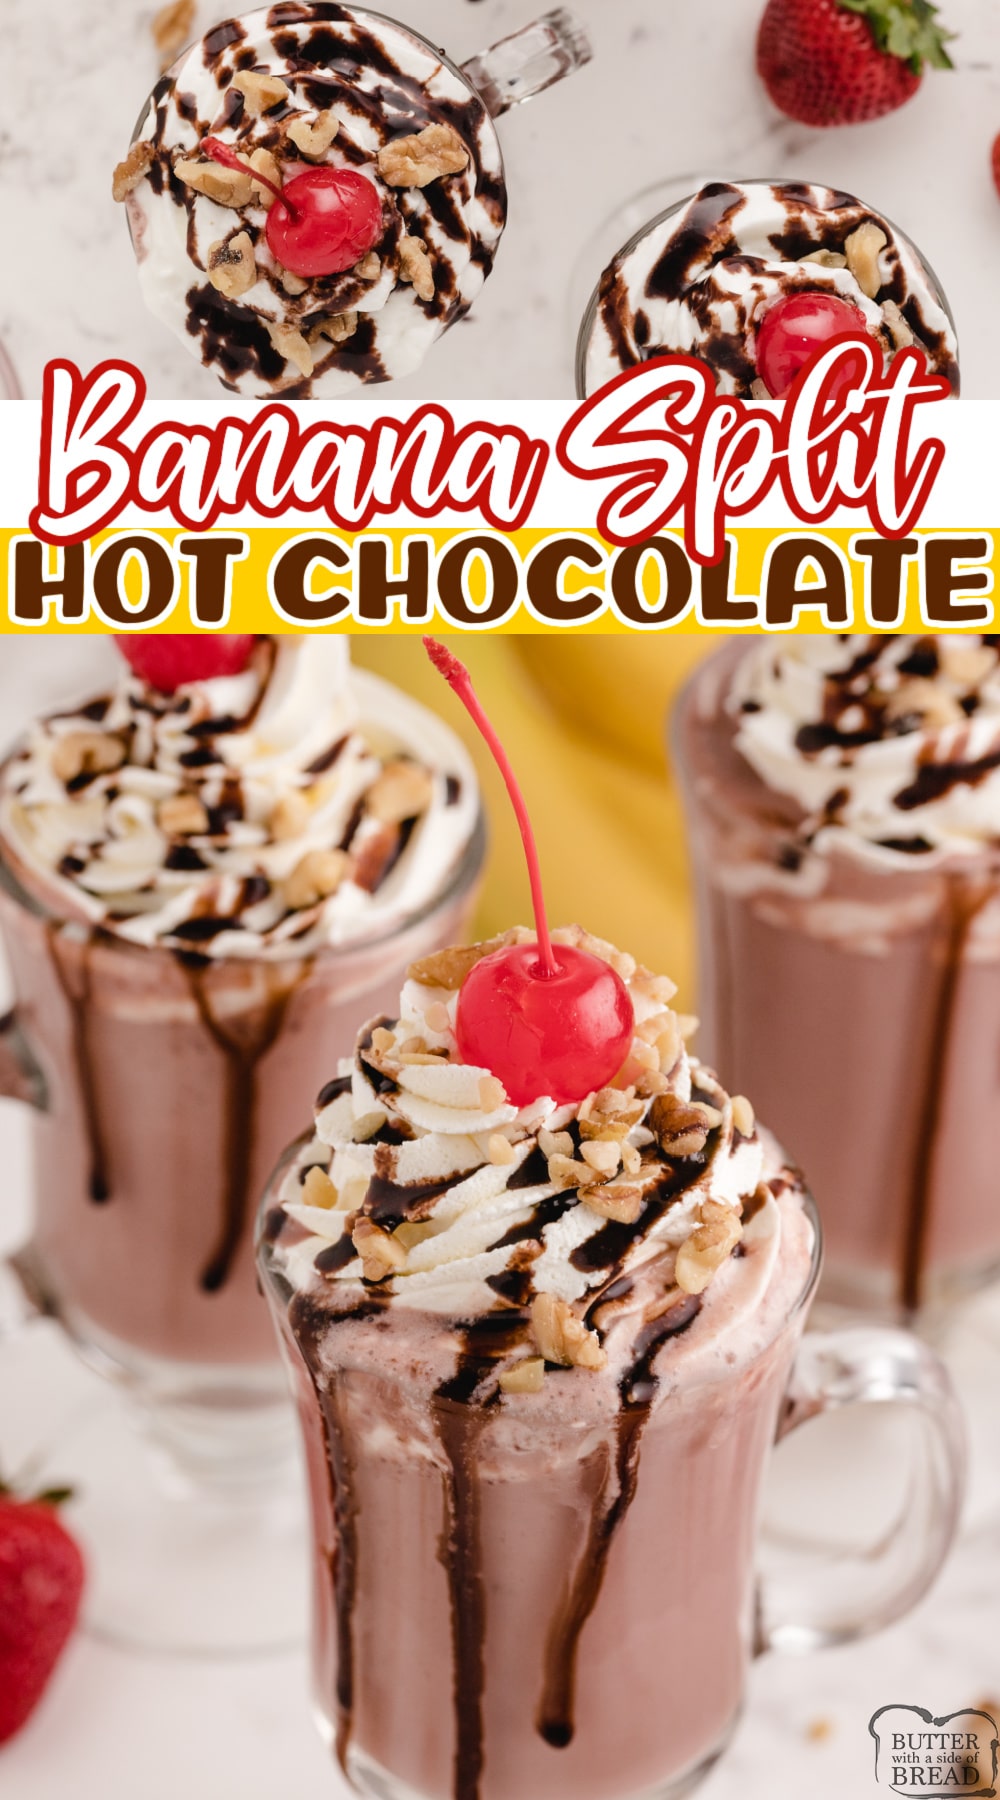 Banana Split Hot Chocolate tastes just like your favorite banana split dessert, but in a mug! Made with hot cocoa mix, bananas, whipped cream, cherries and nuts.